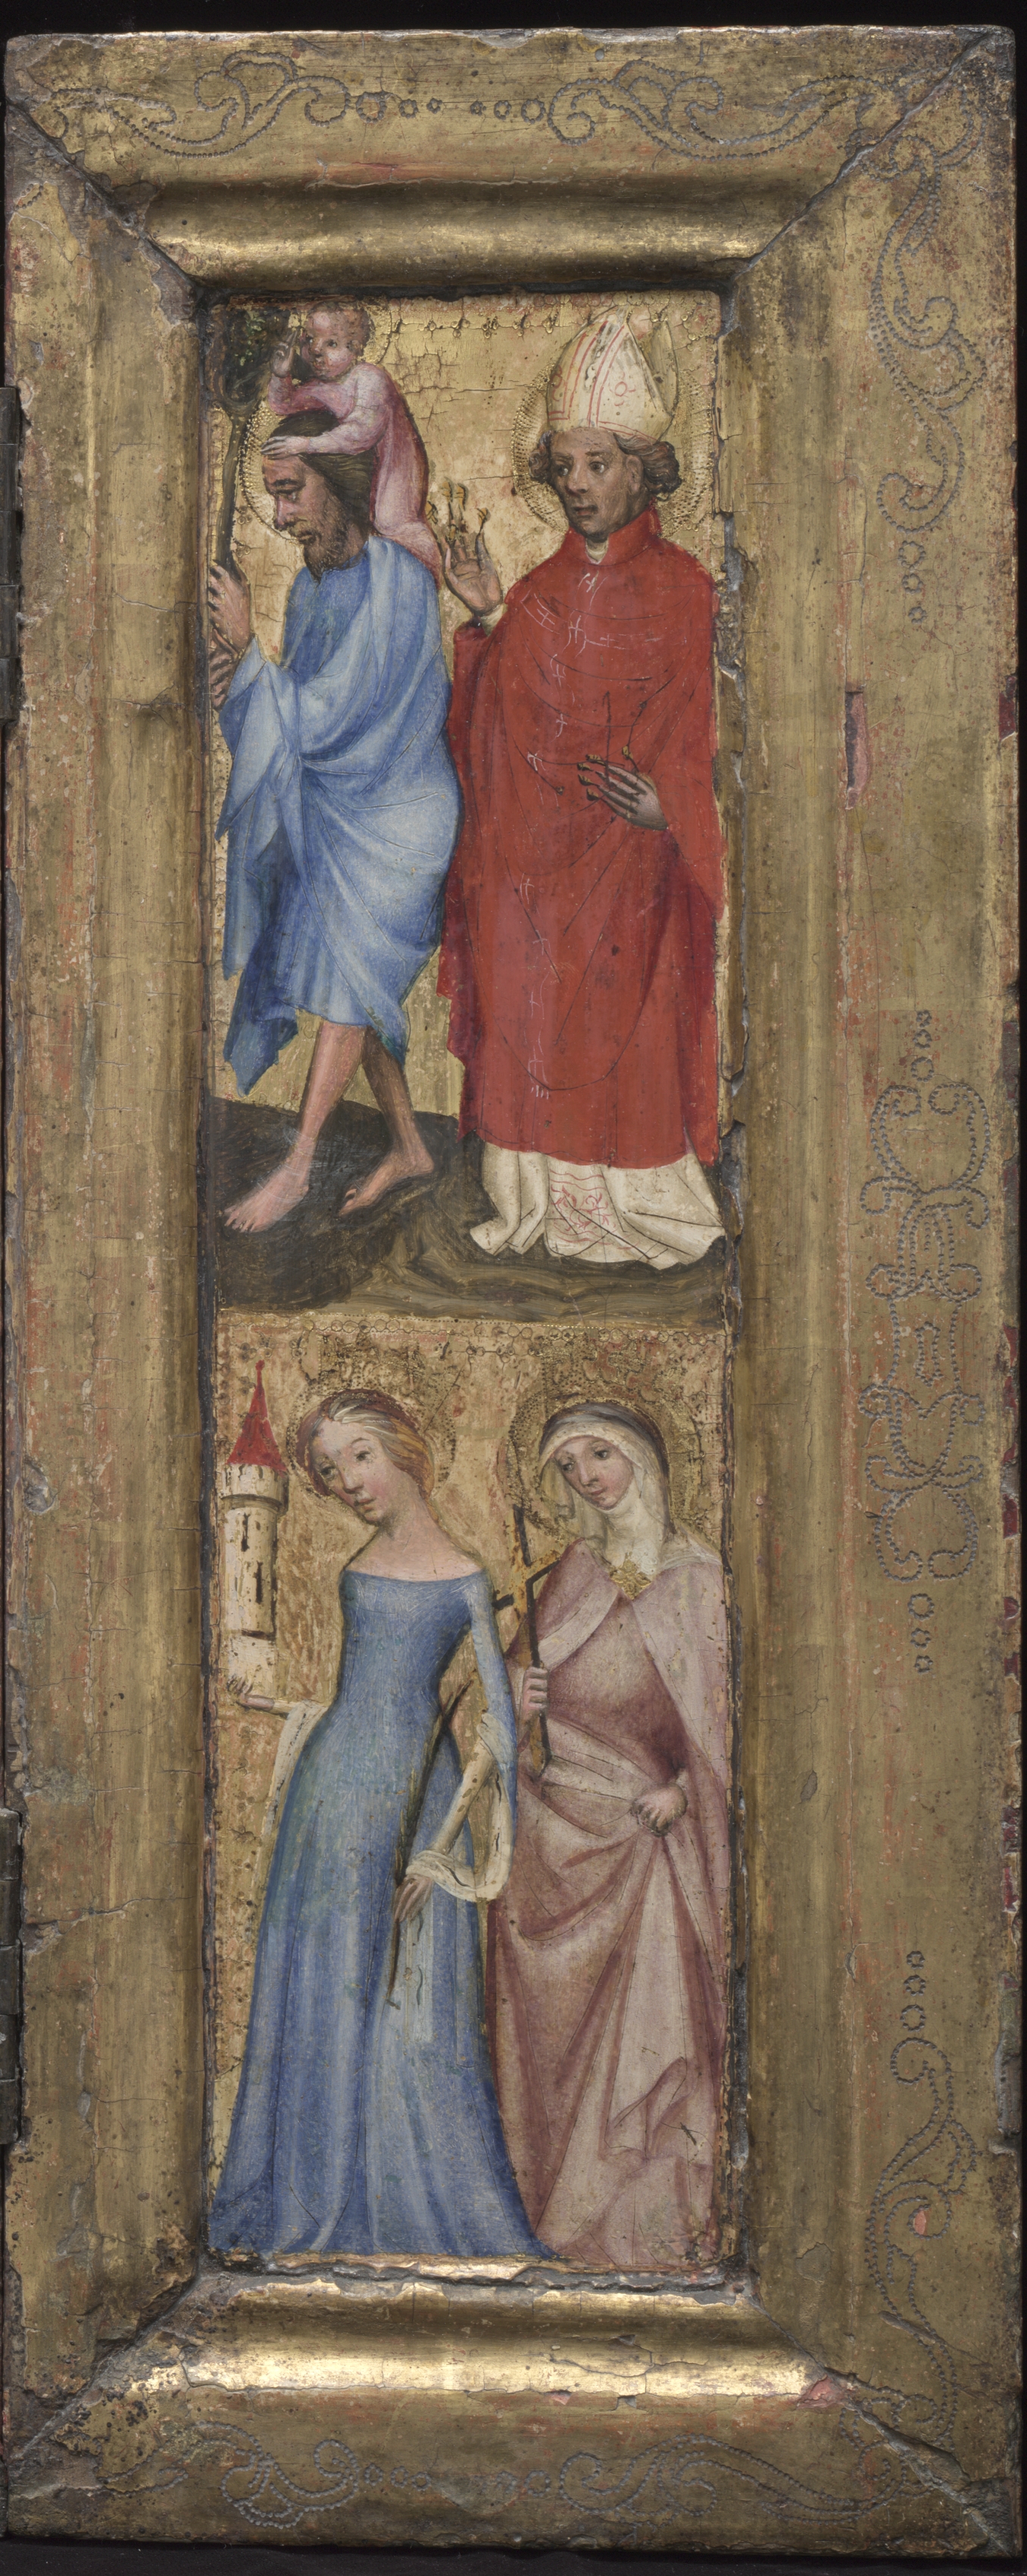 St. Christopher, St. Erasmus, St. Barbara, and another female saint